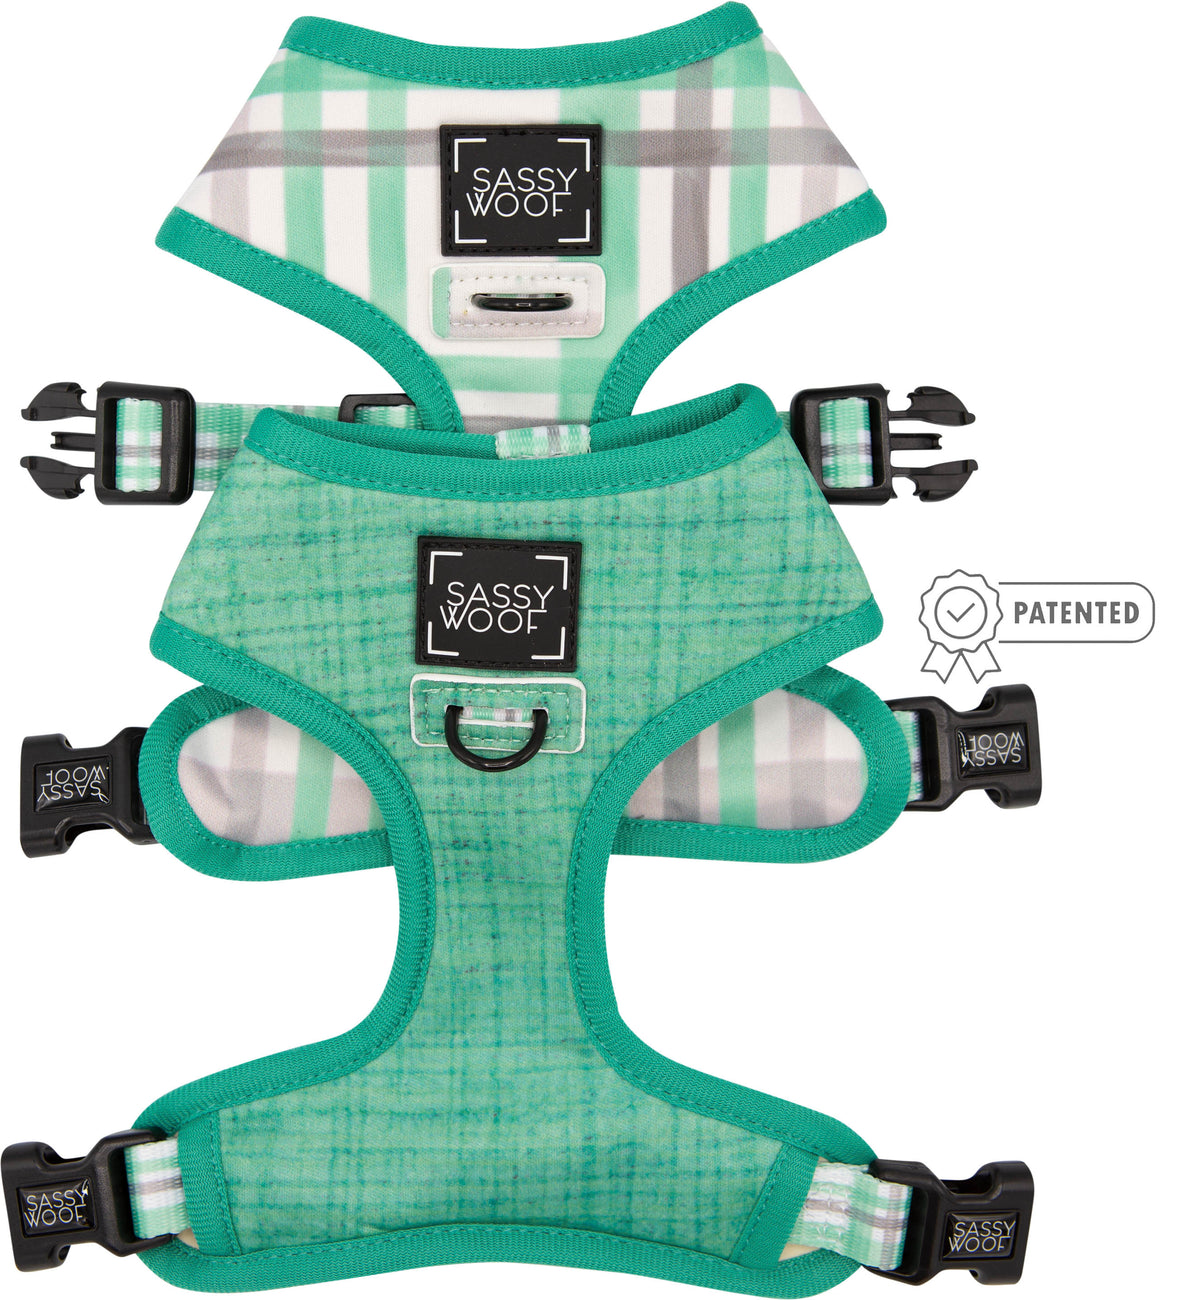 Dog Reversible Harness - Wag Your Teal